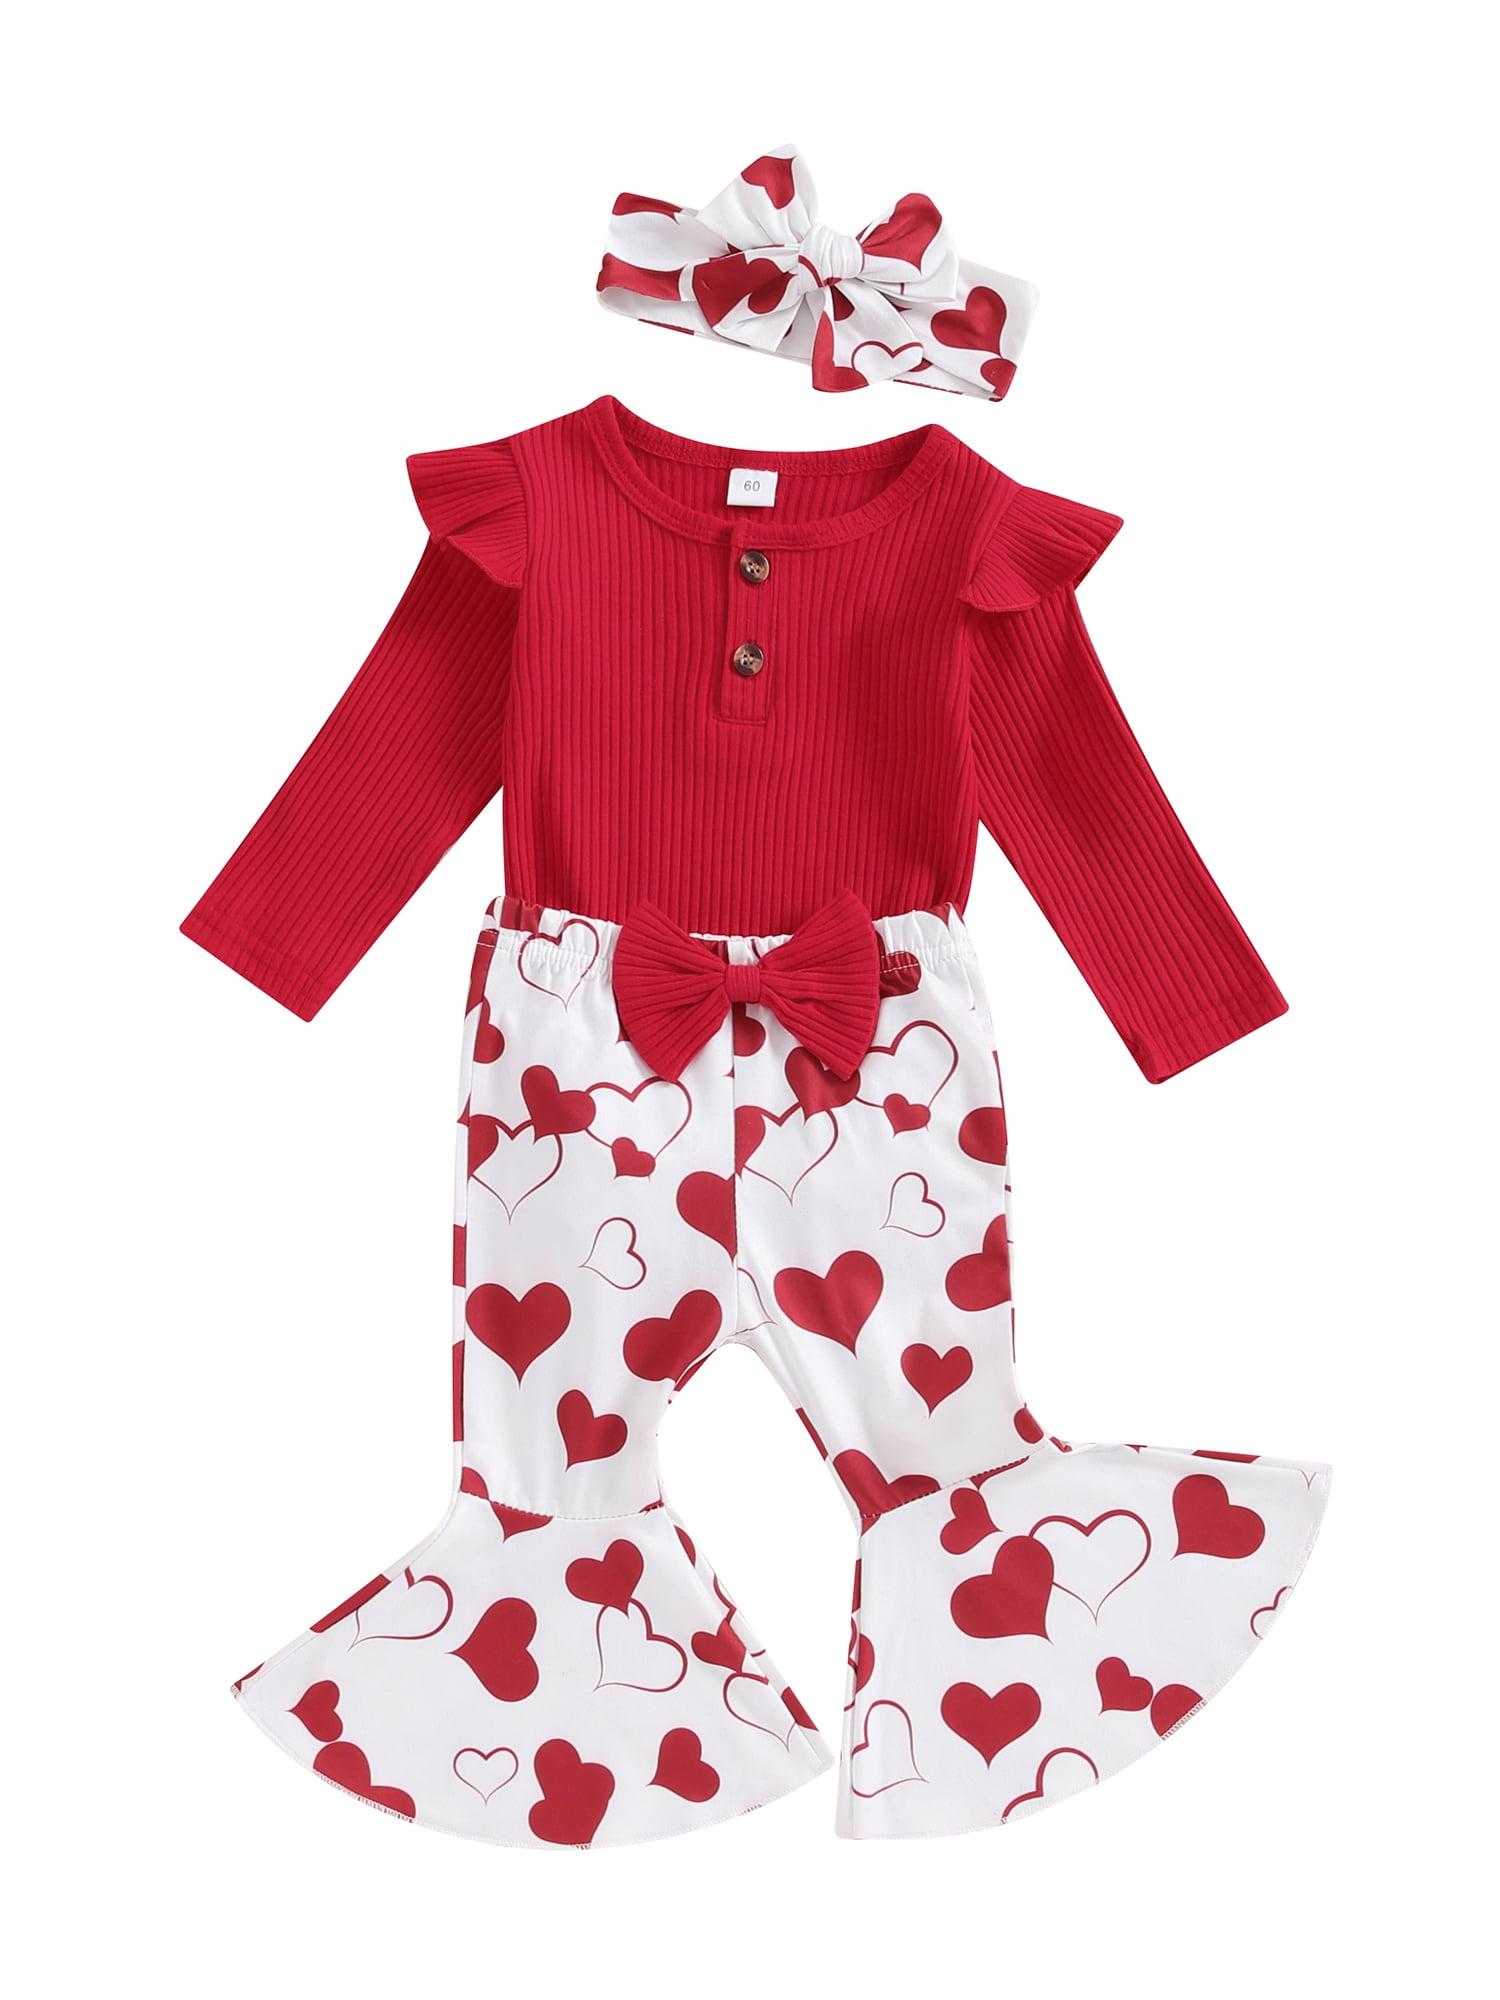 Qiylii Baby Girls Valentine’s Day Outfits 0 3 6 12 18 Months Long ...